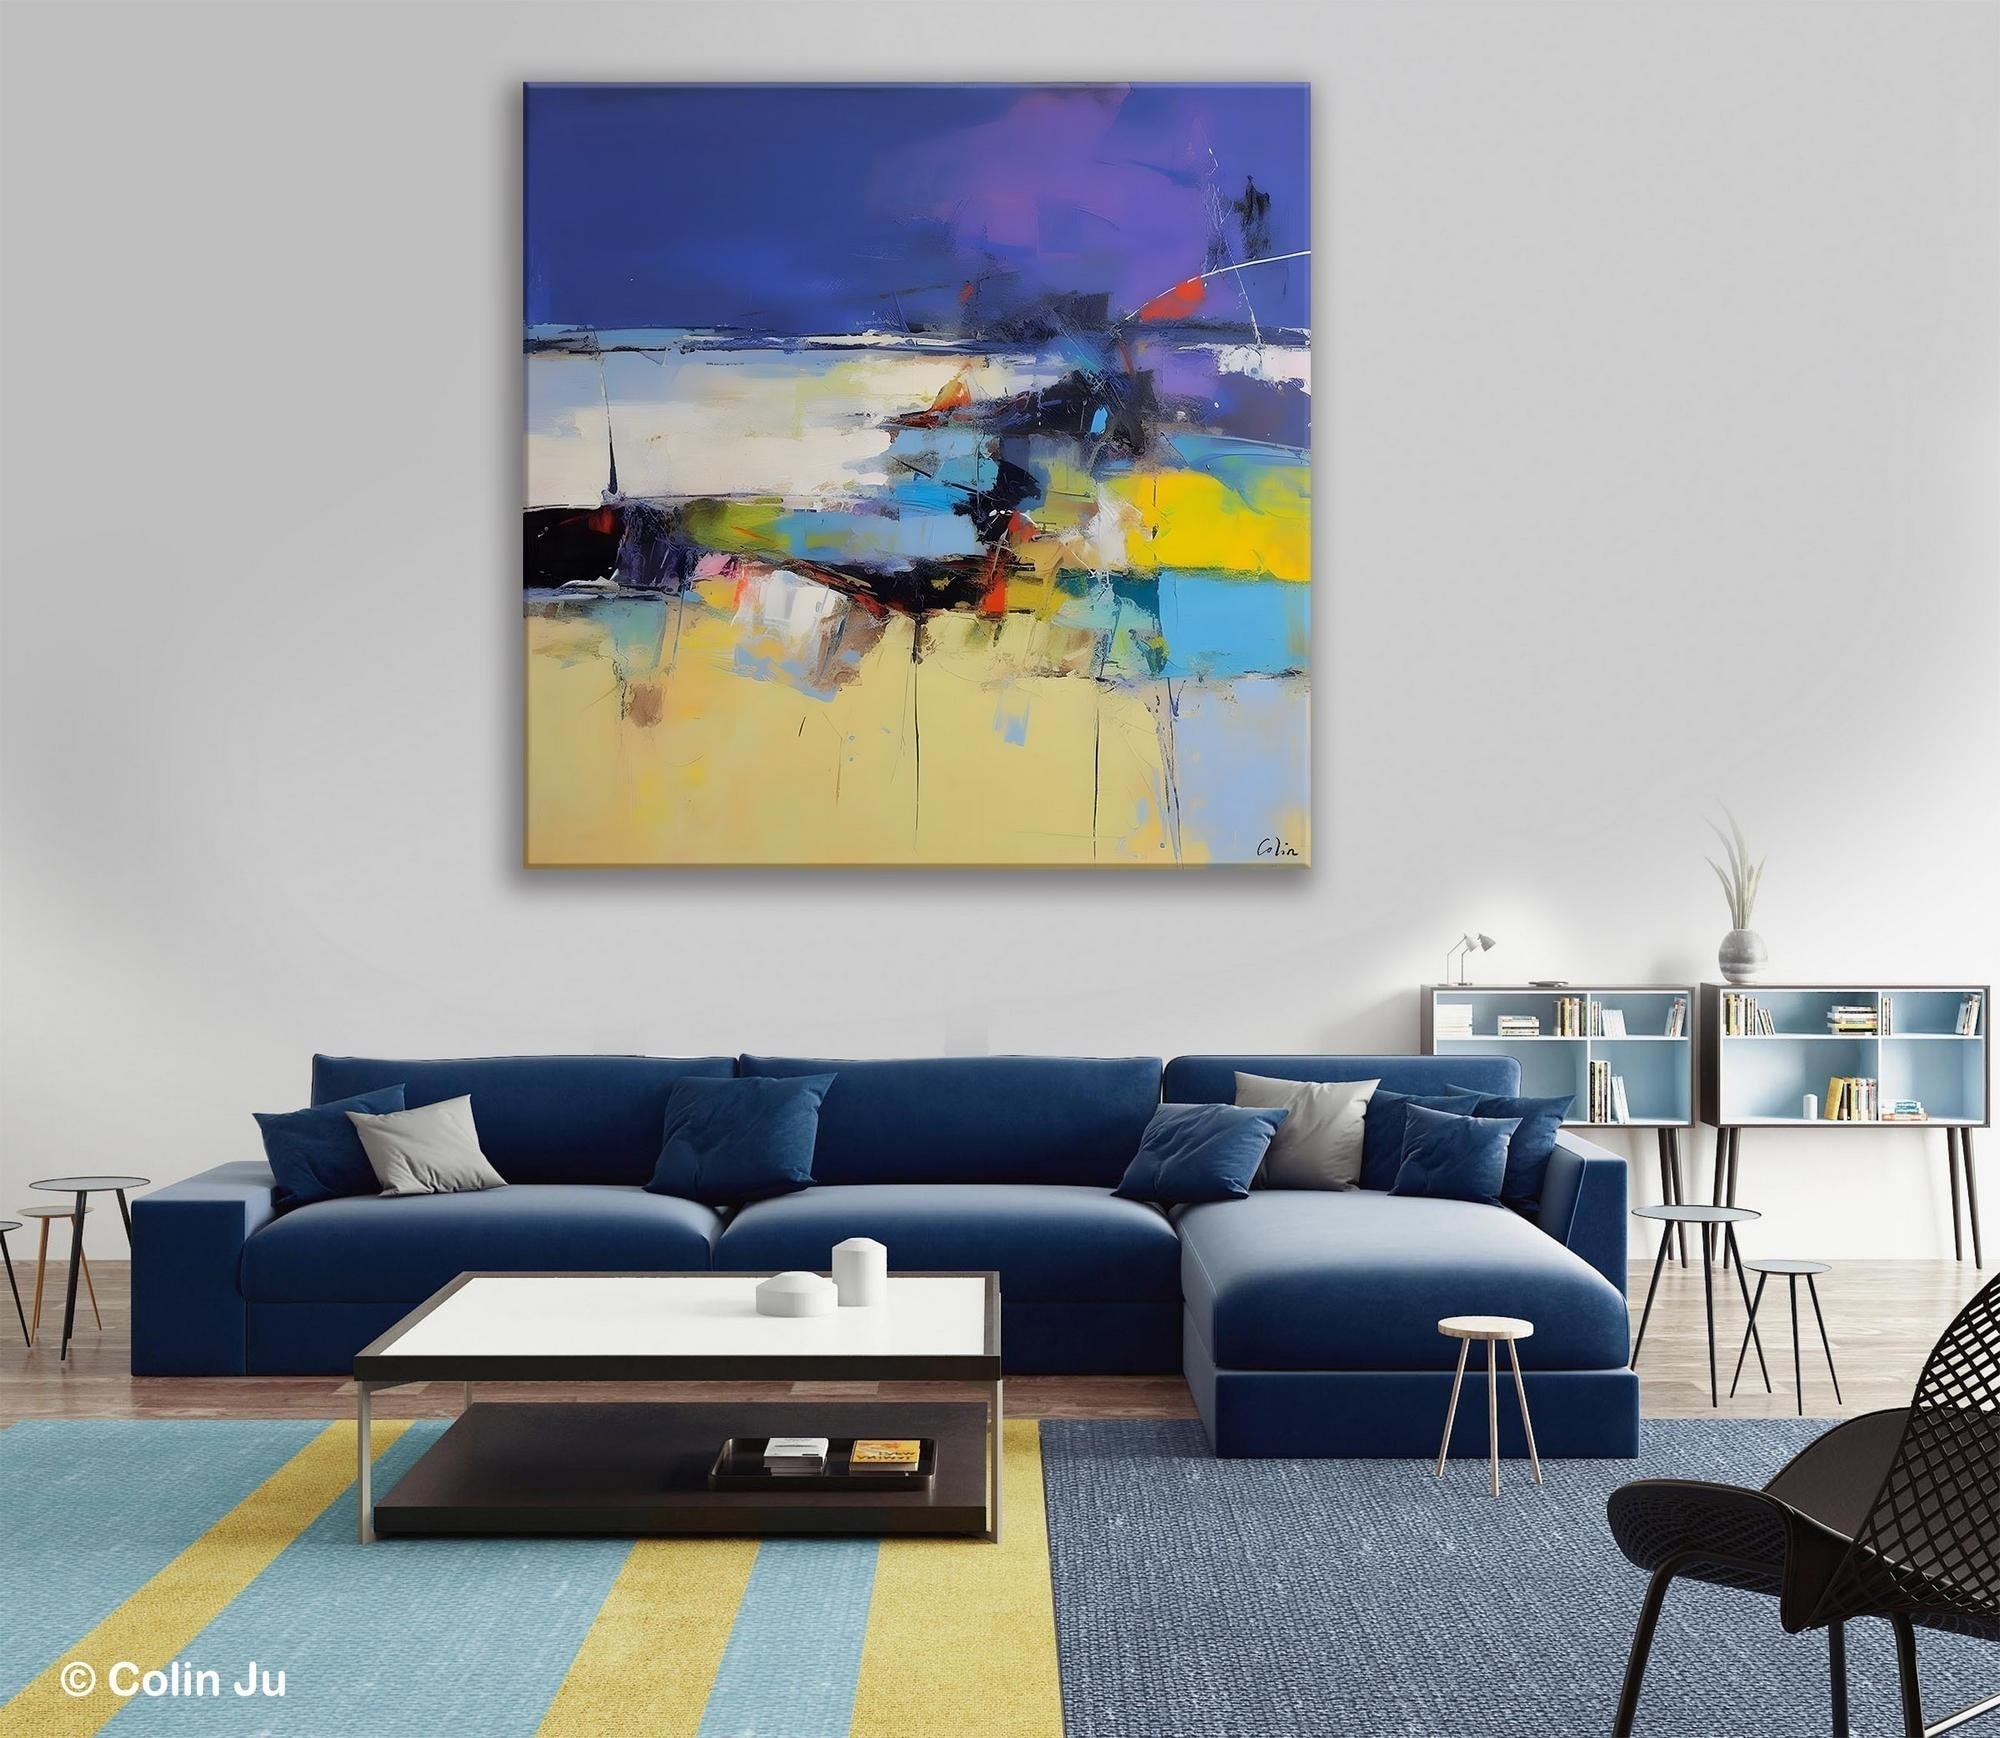 Original Modern Abstract Artwork, Geometric Modern Canvas Art, Extra Large Canvas Paintings for Living Room, Abstract Wall Art for Sale-ArtWorkCrafts.com